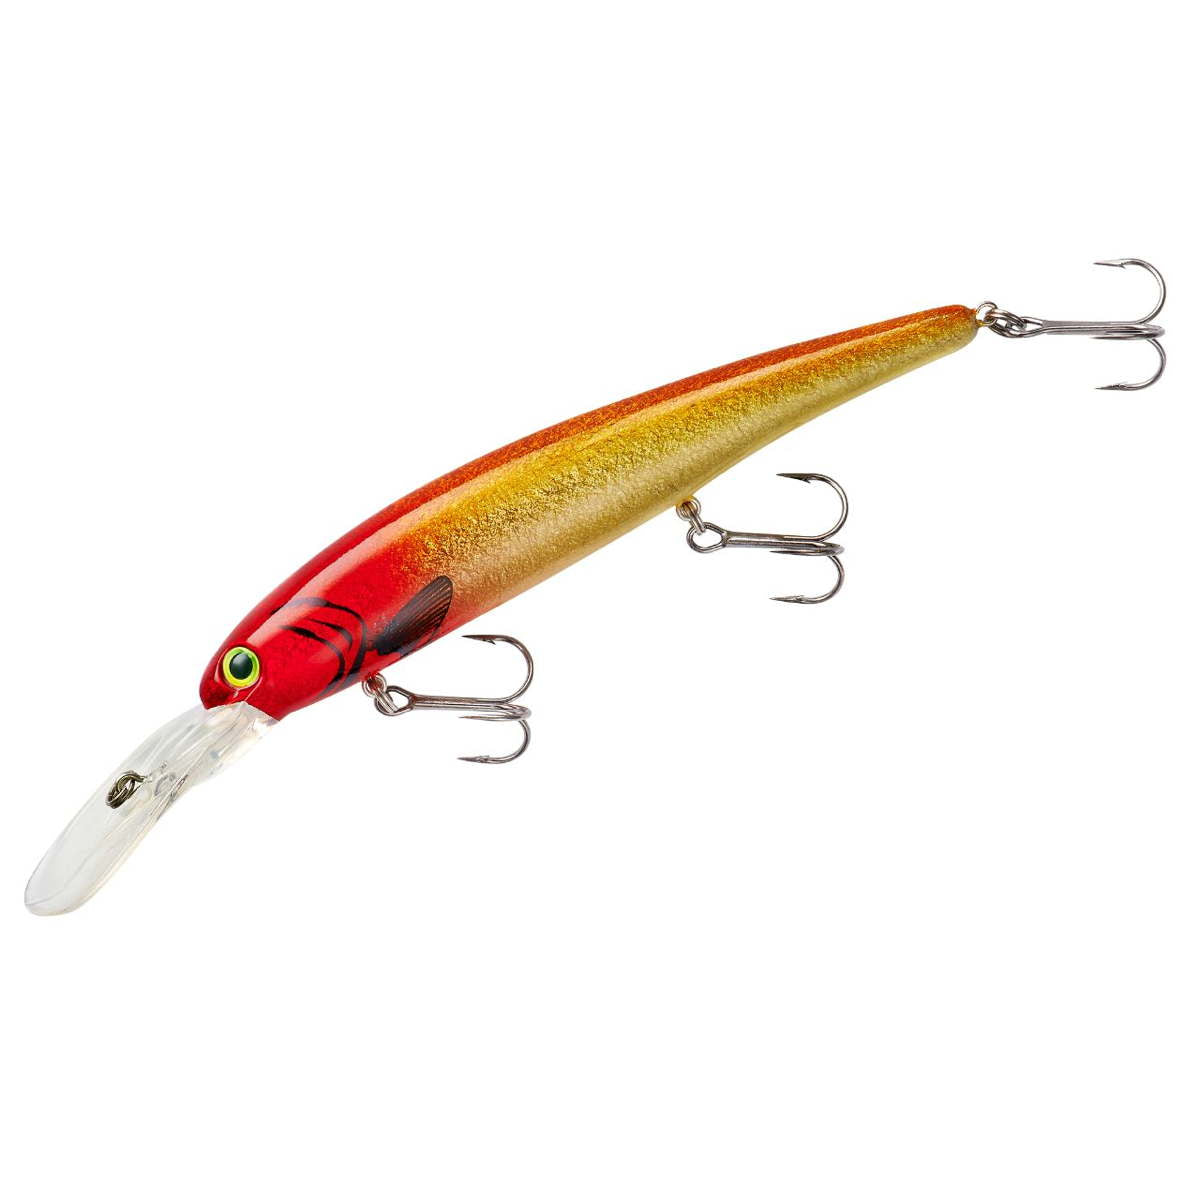 Photo of Bandit Lures Deep Walleye for sale at United Tackle Shops.